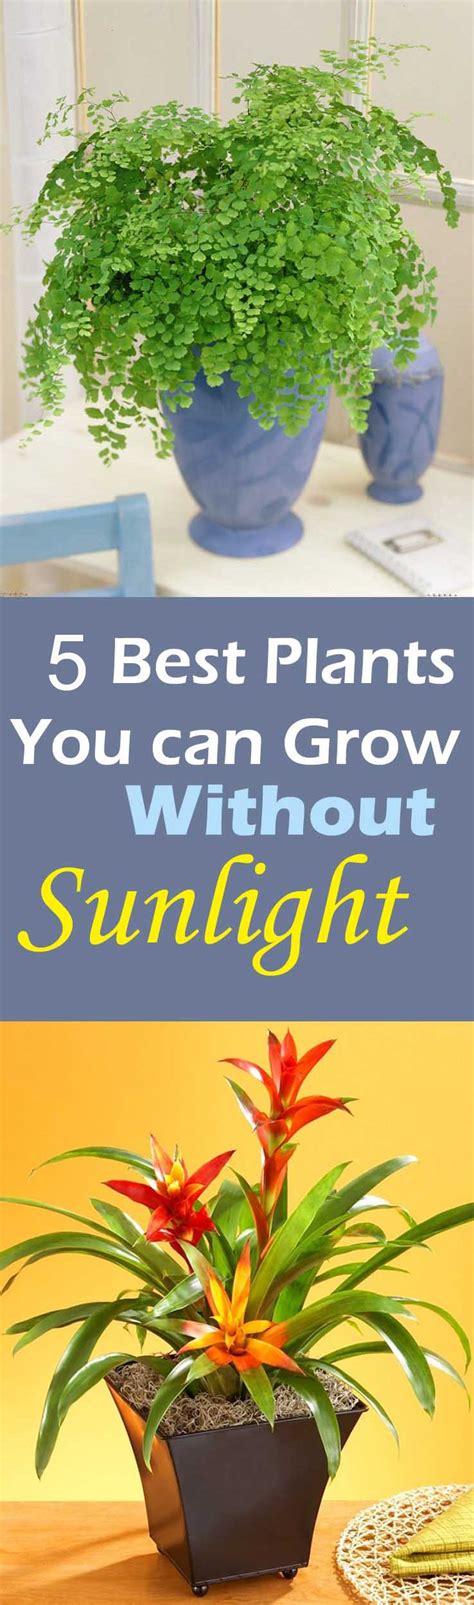 Plants That Grow Without Sunlight 5 Best Plants To Grow Indoors